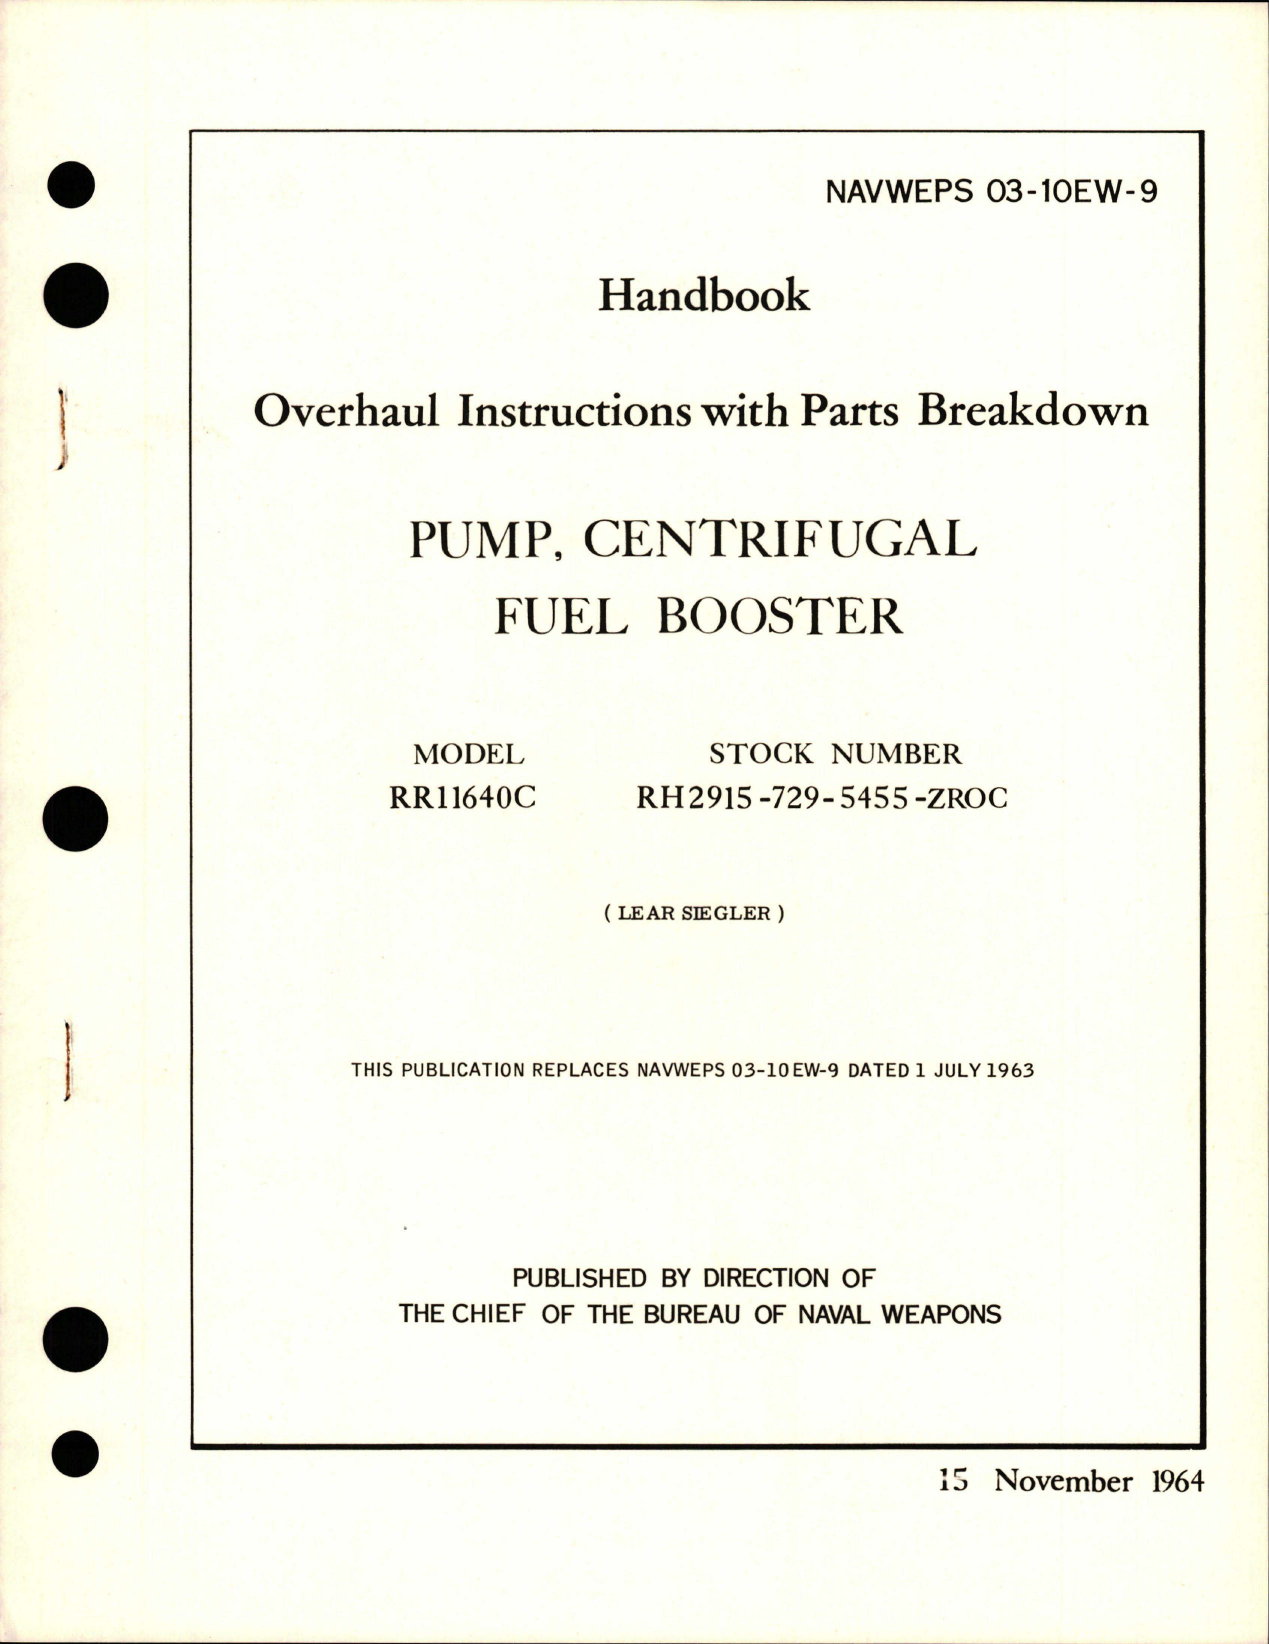 Sample page 1 from AirCorps Library document: Overhaul Instructions with Parts for Centrifugal Fuel Booster Pump - Model RR11640C 